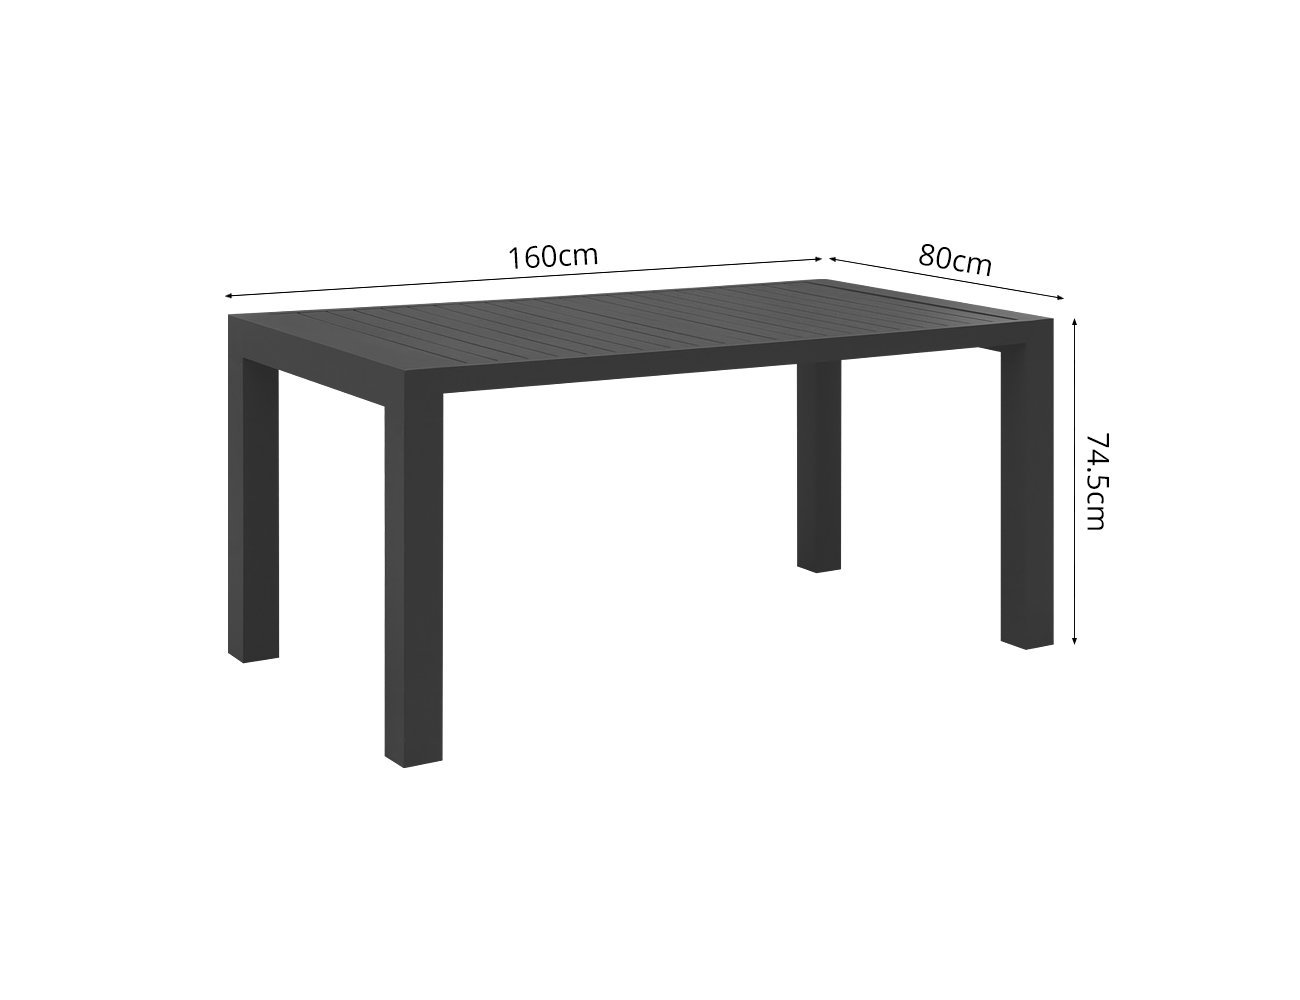 Cirrus Outdoor Table - Grey @ Crazy Sales - We have the best daily